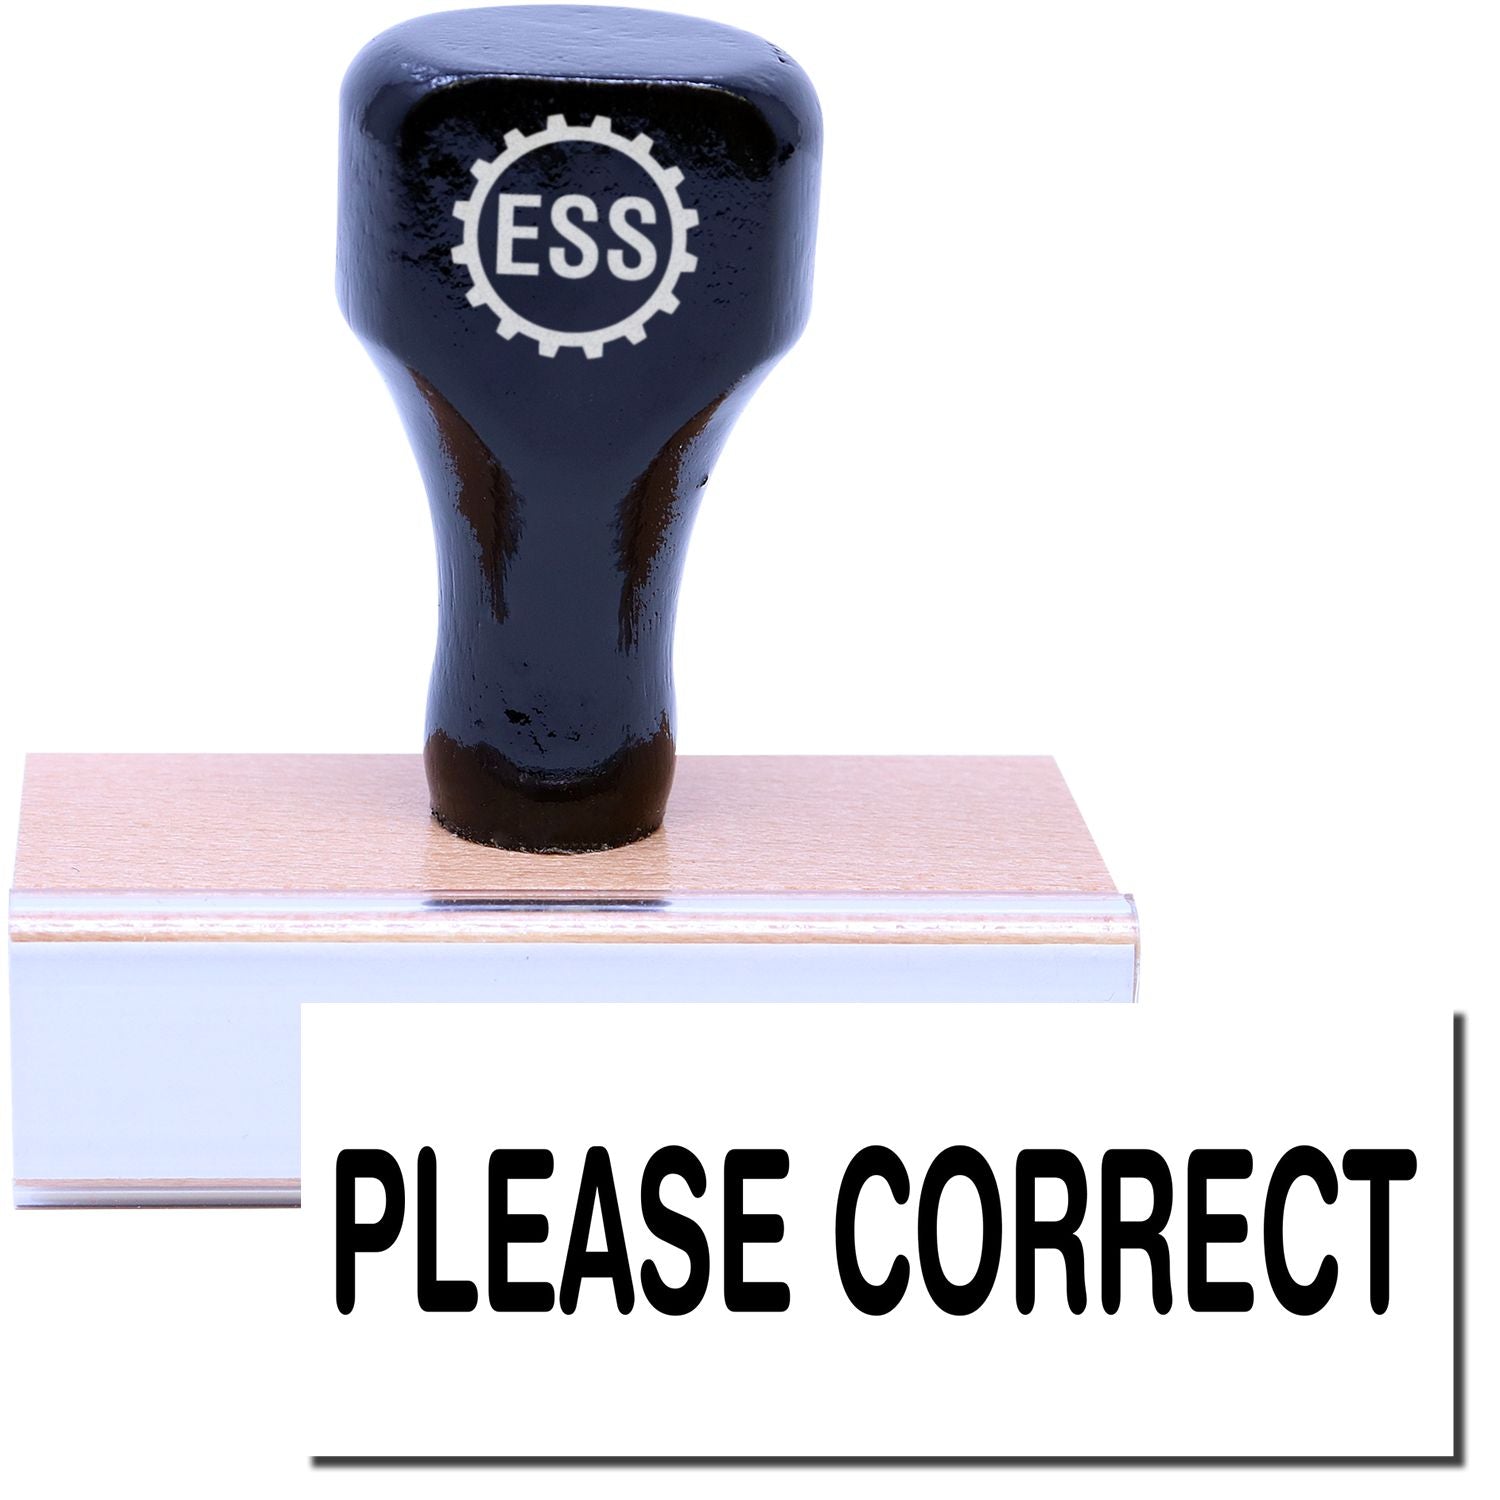 A stock office rubber stamp with a stamped image showing how the text "PLEASE CORRECT" is displayed after stamping.